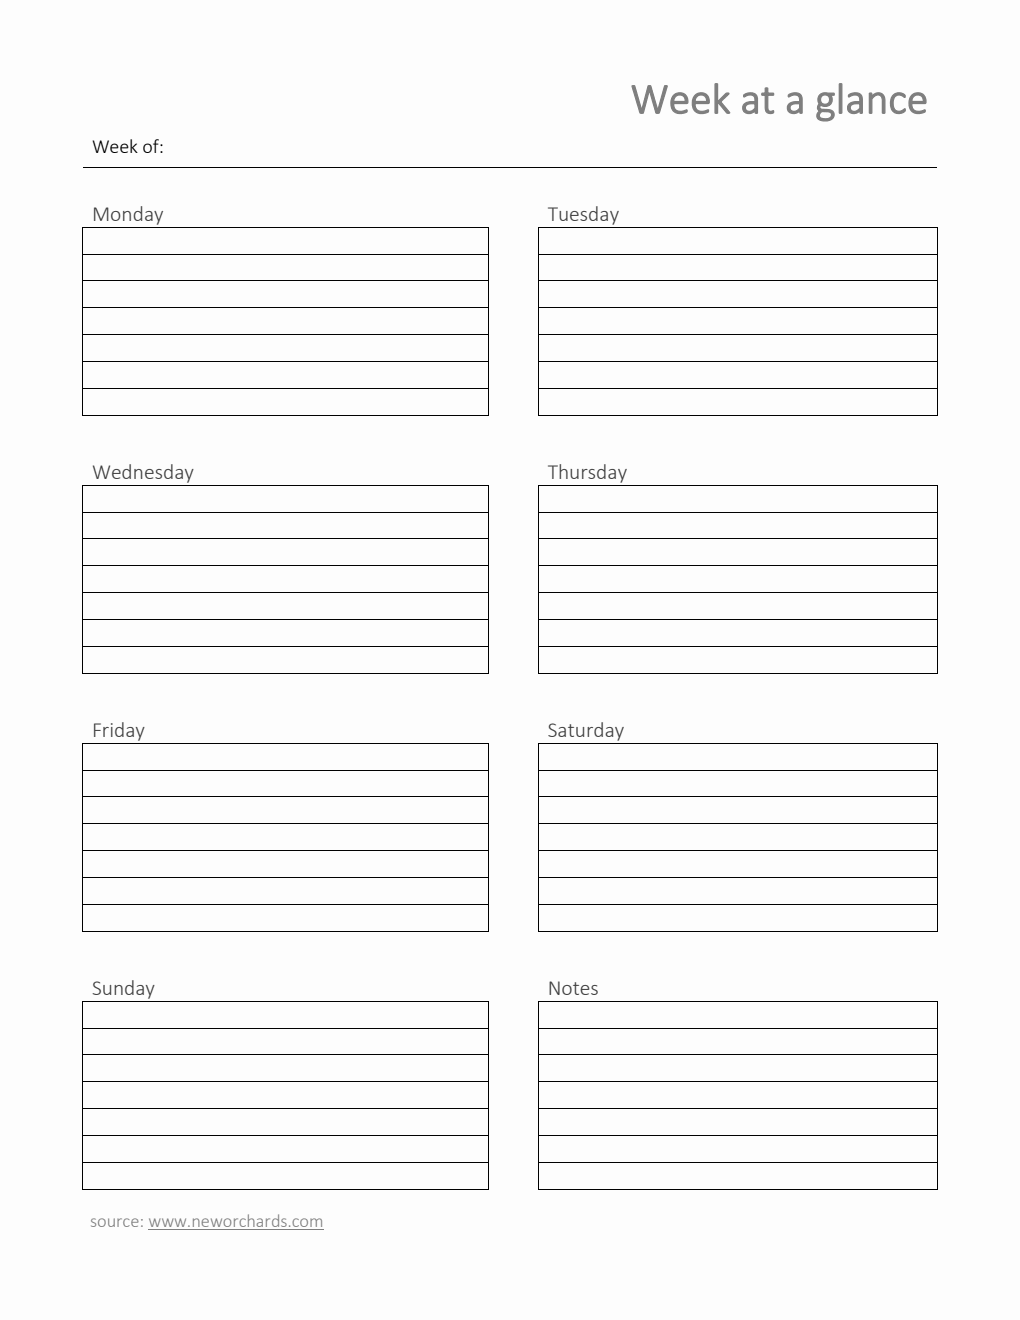 Downloadable Week at a Glance Template (PDF)